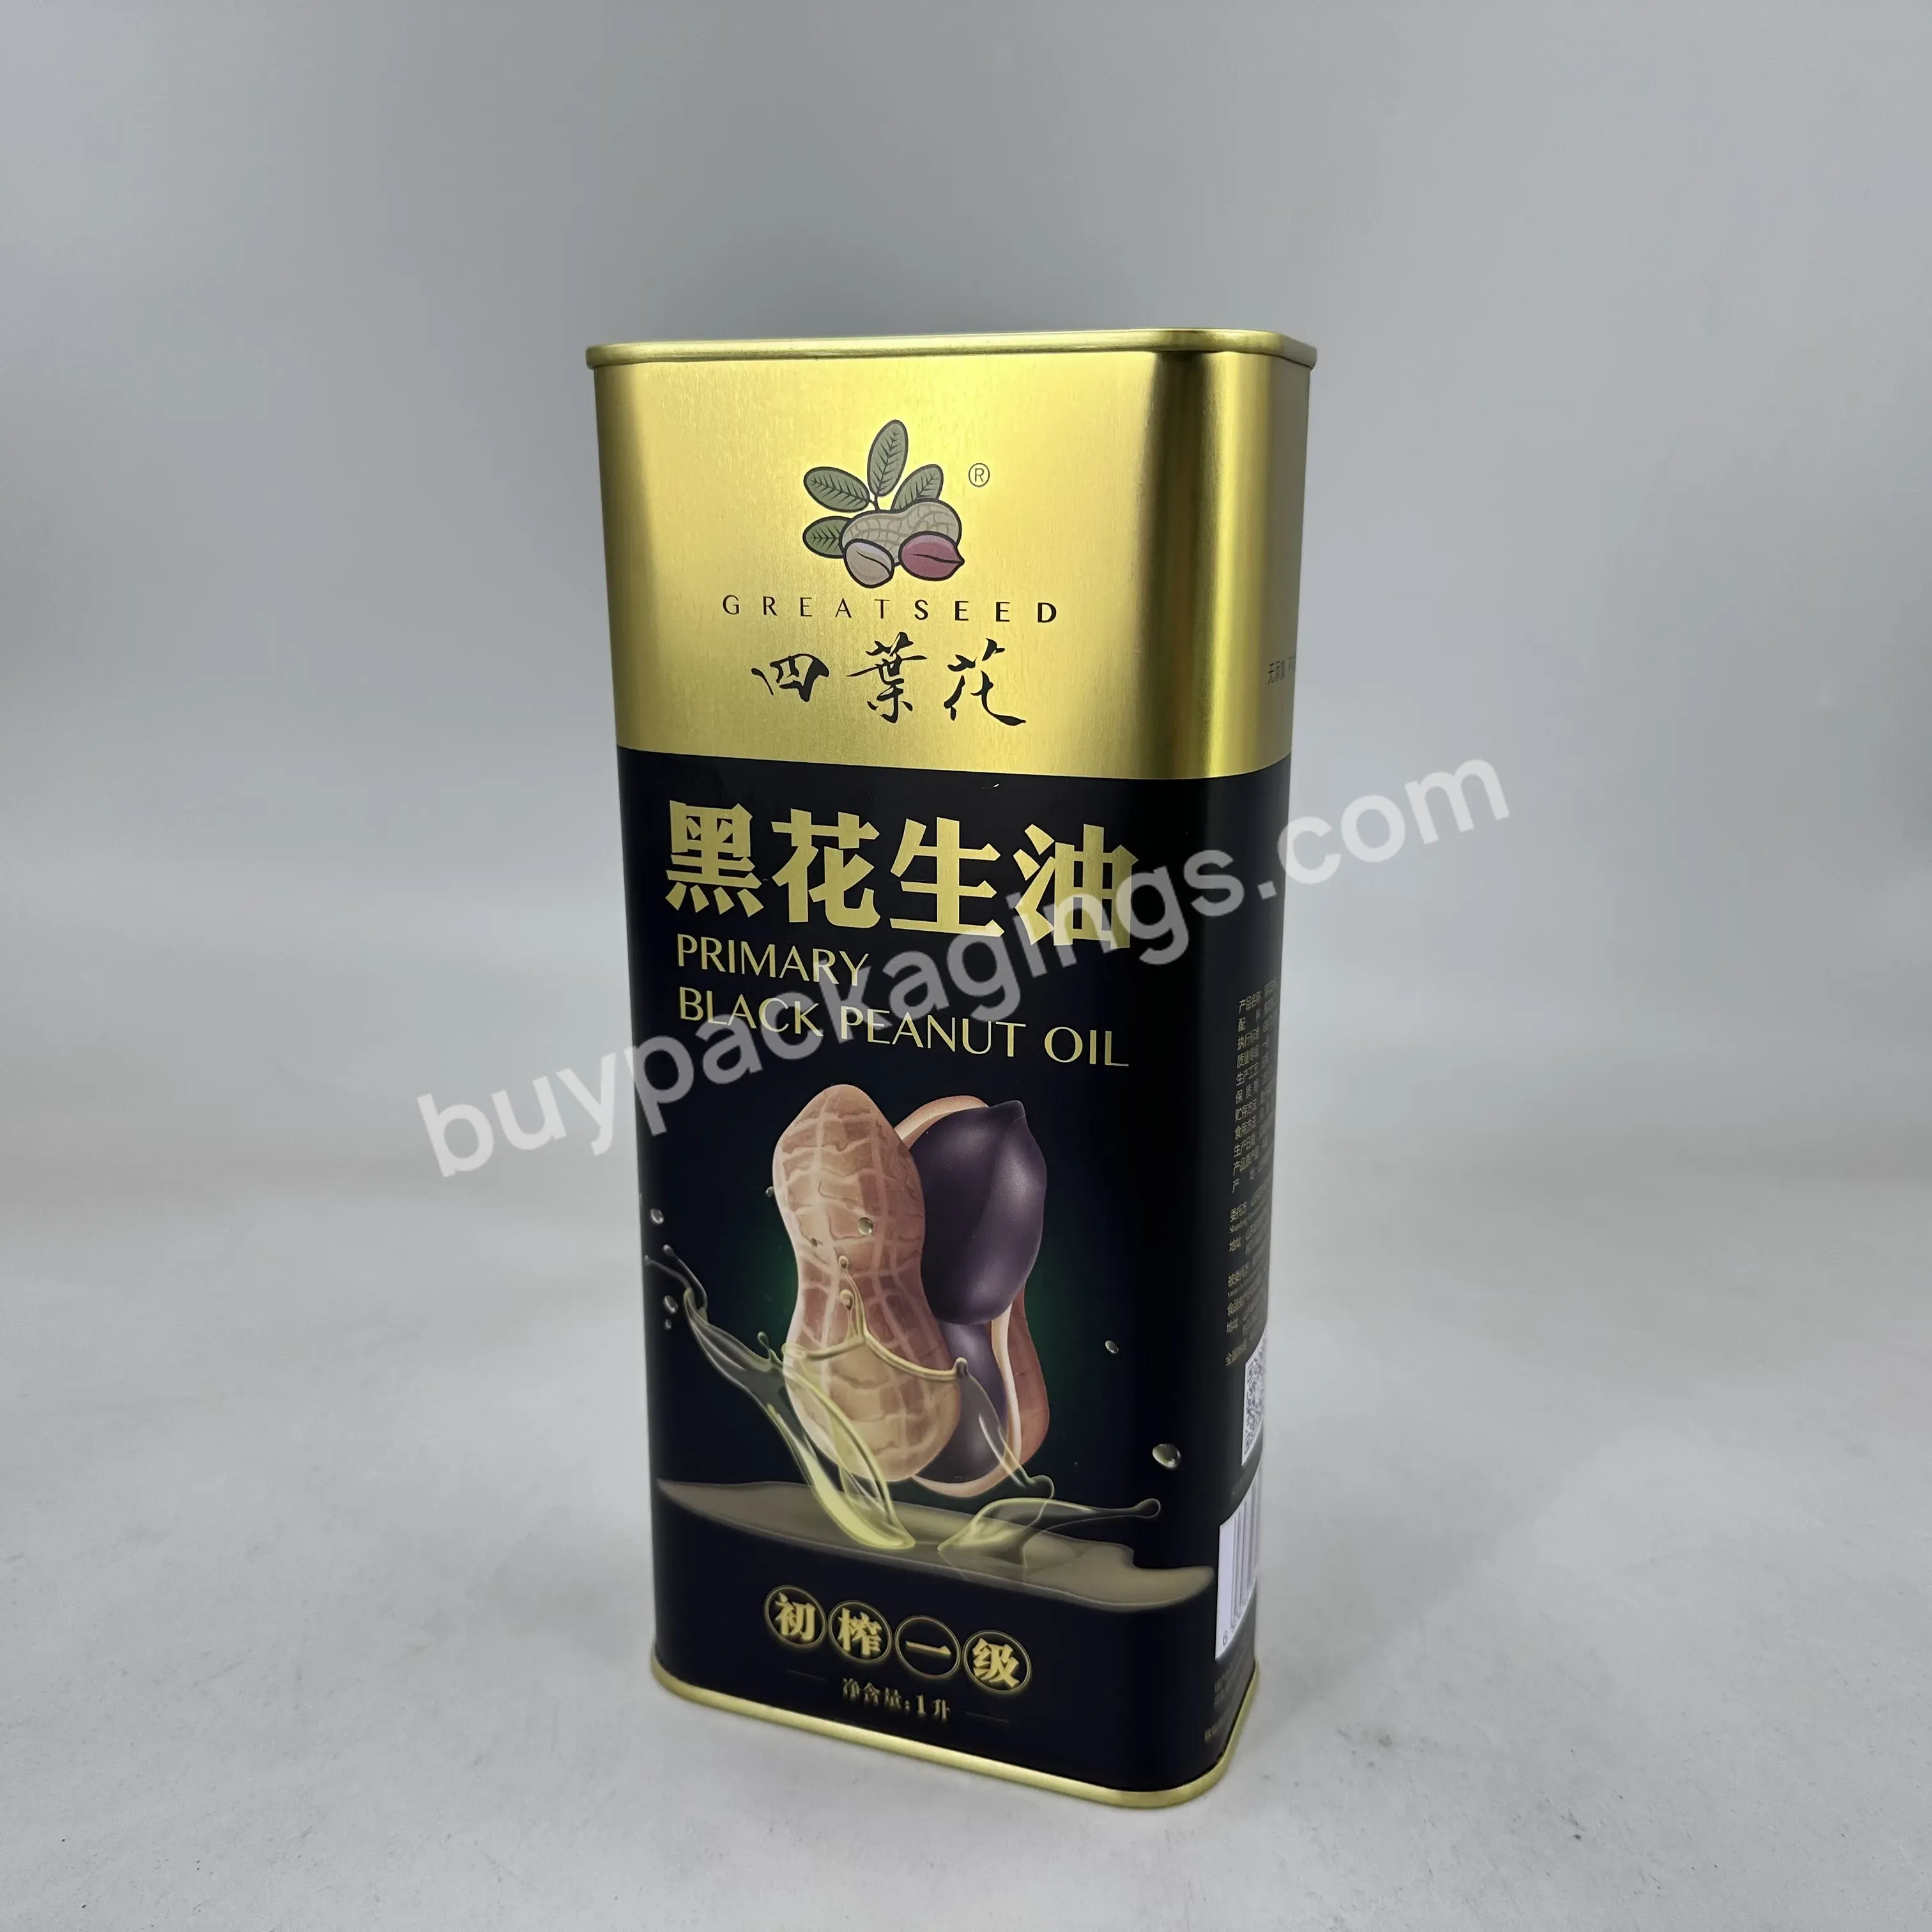 Wholesale High Quality 1l Empty Tin Oil Can Food Grade Olive Oil Tin Packing With Plastic Spout Lid For Food Oil - Buy High Quality 1l Empty Tin Oil Can,Food Grade Olive Oil Tin Packing,With Plastic Spout Lid For Food Oil.